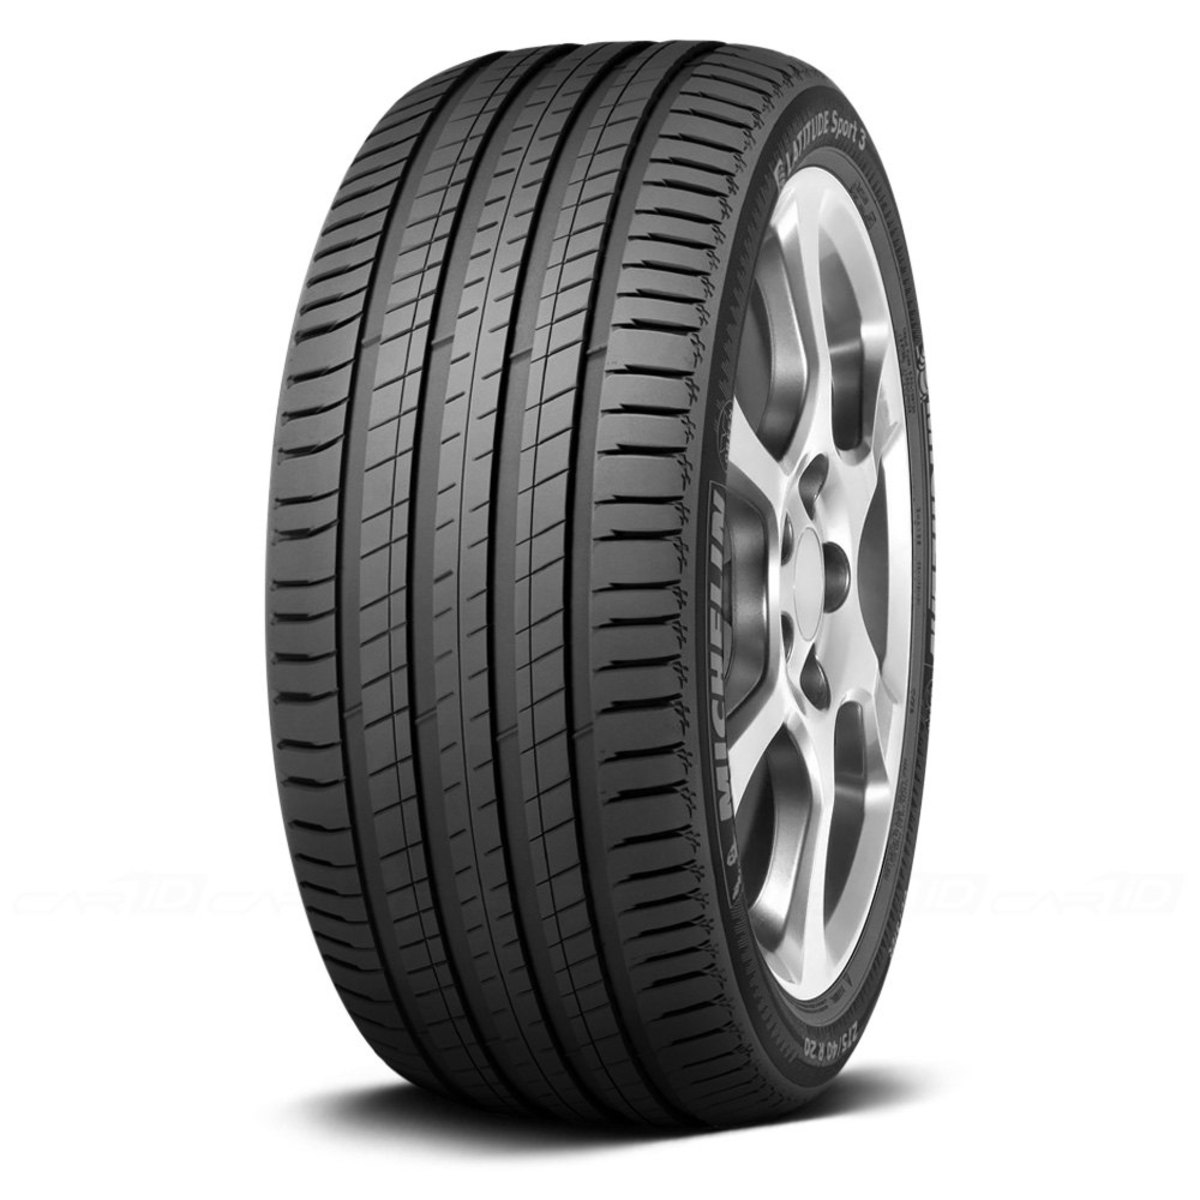 Michelin Latitude Sport 3 - and Tests Reviews Tyre